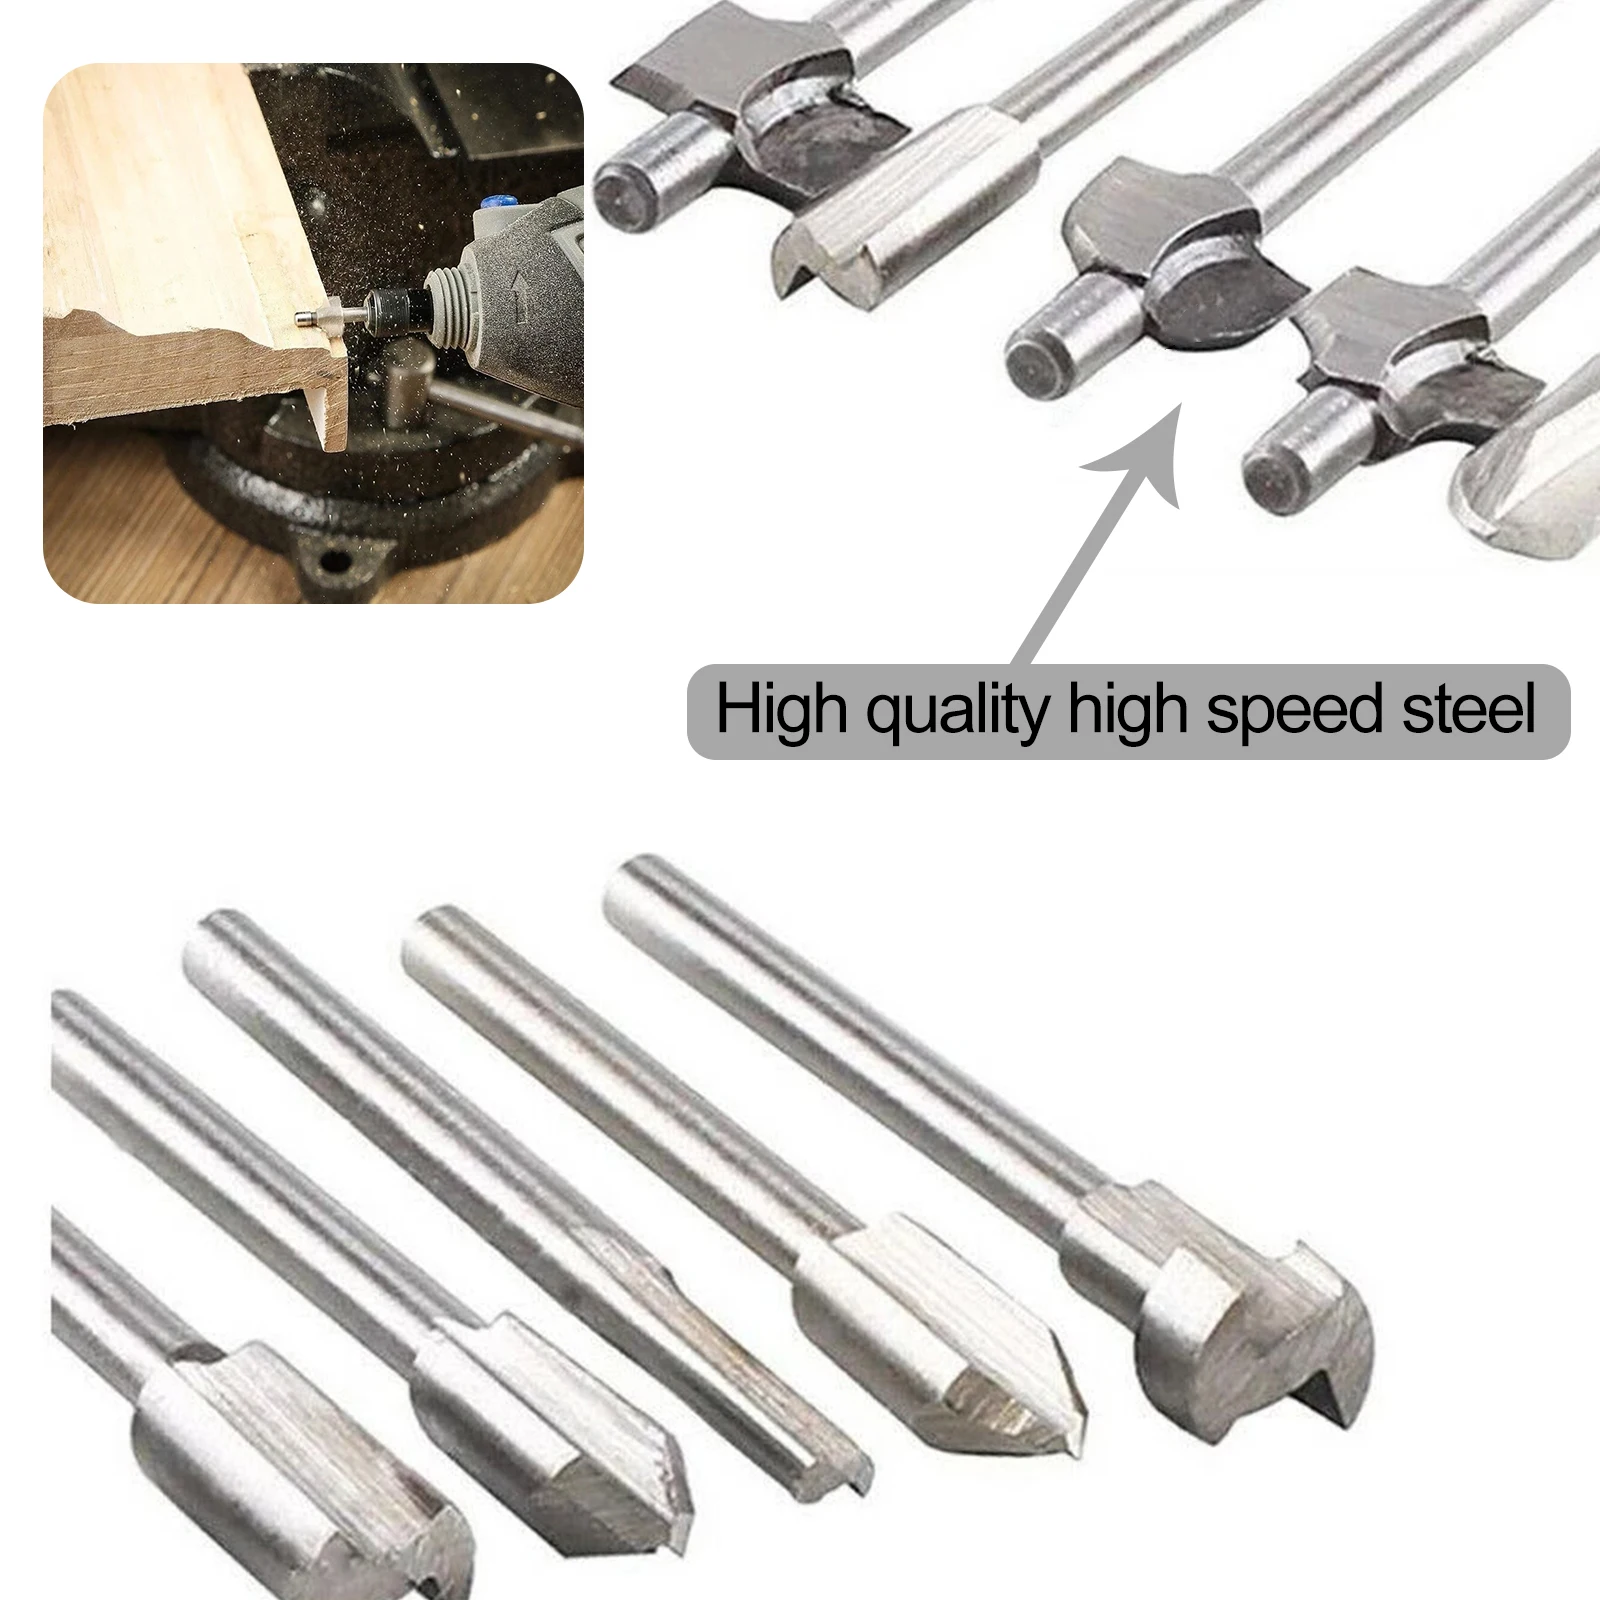 10pcs 3.2mm Routing Router Drill Bits Set Wood Stone Metal Root Carving Milling Cutter For Dremel Rotary Tool 400 1000 3000 8000 premium whetstone cut sharpening stone set sharpener non slip base cutter sharpener